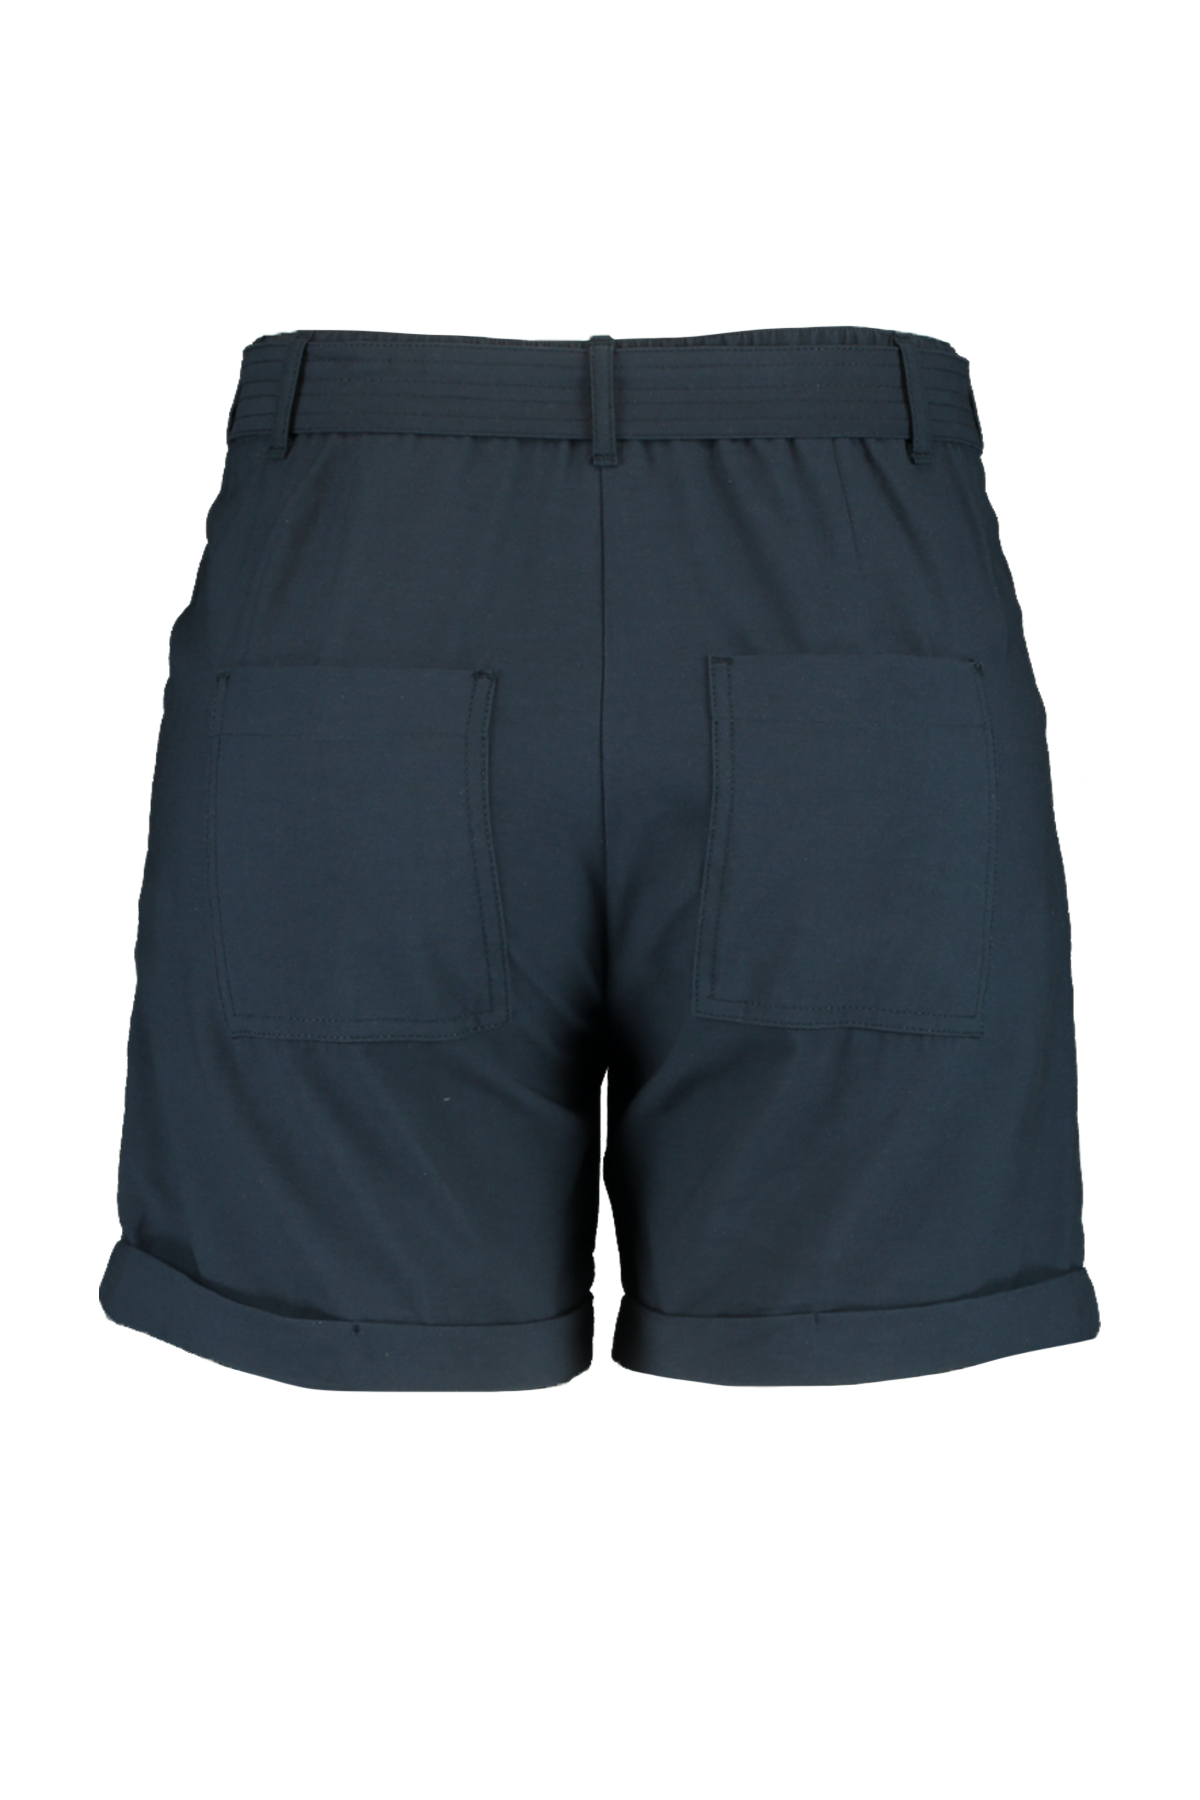 Shorts con cremalleras  image number null